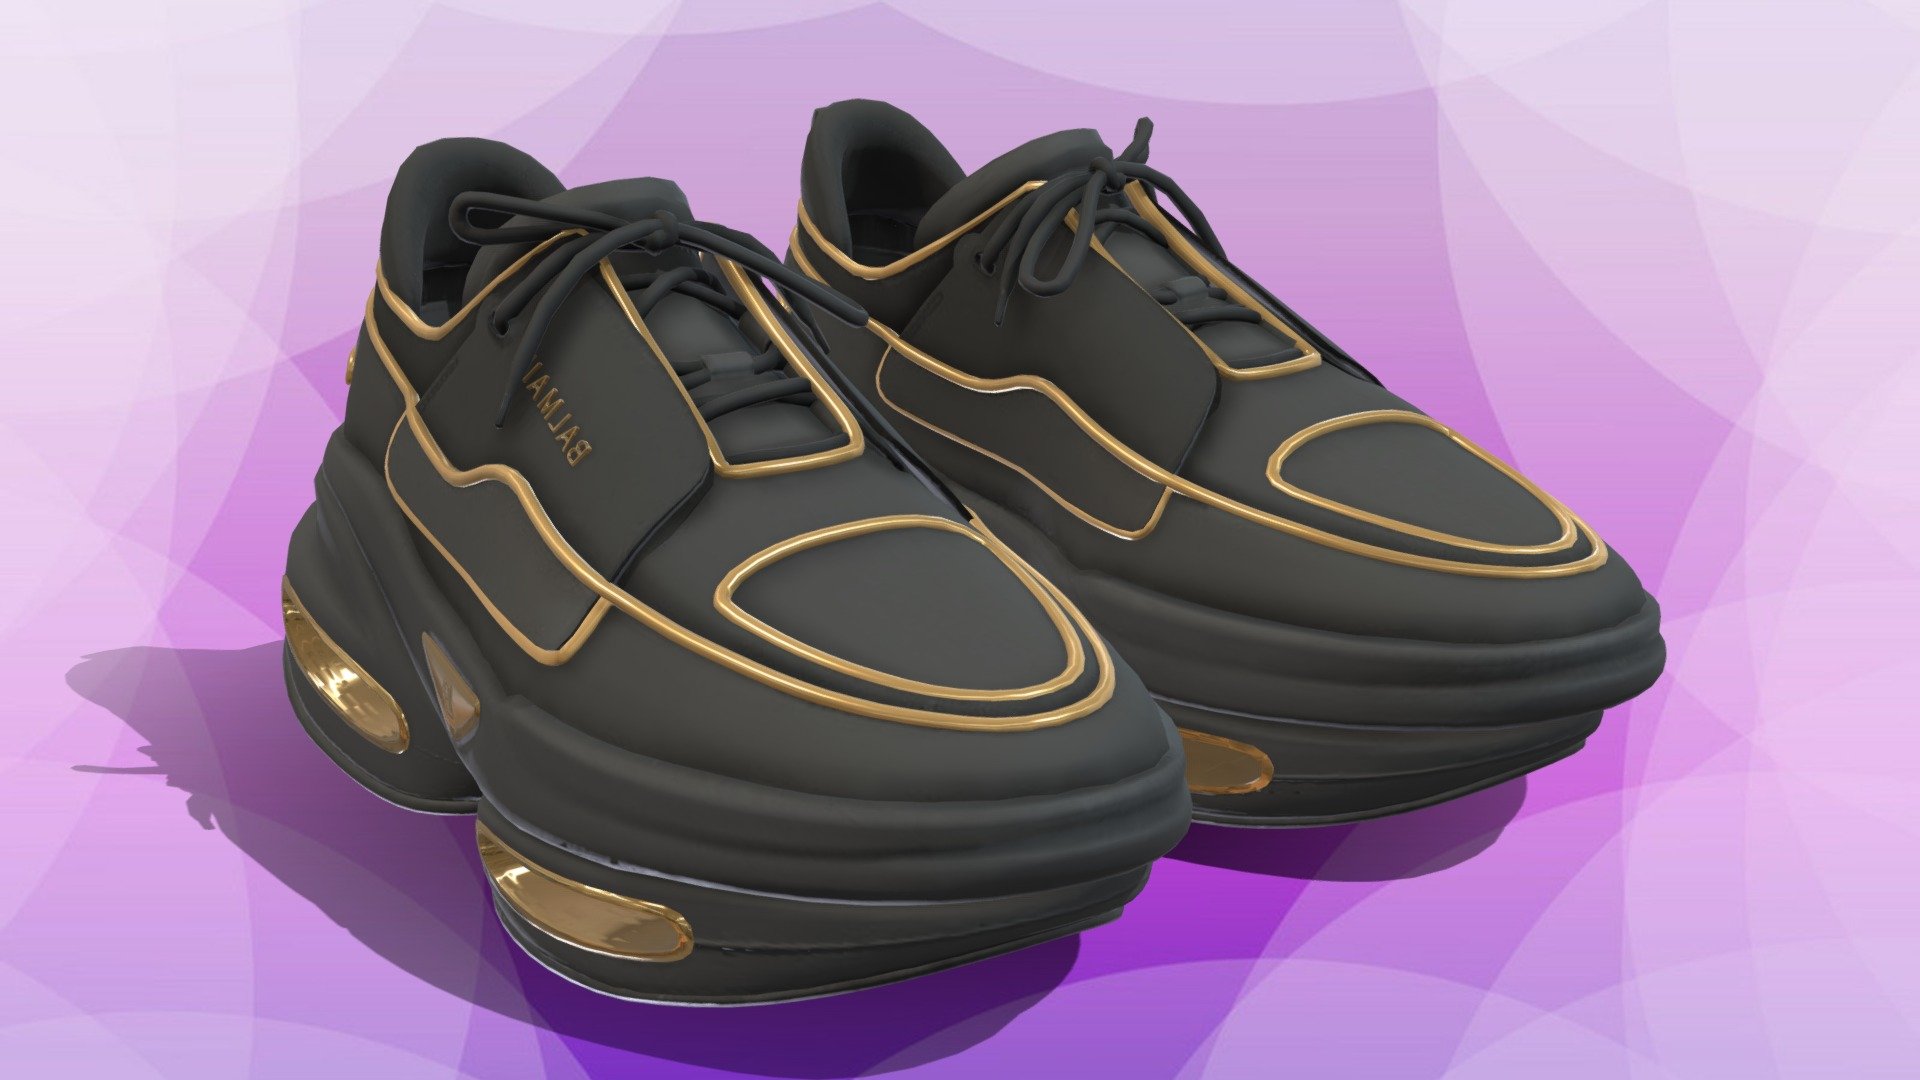 A Very Detailed scanned shoes with High-Quality .Reay to use in virtual try on project and game sim 4 or second life.

The Mesh is UV unwrapped.The length of all my shoes is about 24cm.

4096x4096 difuse Texture Map jpg format，in the compressed file rar.

The textures is lighting baked,the texture is uploaded to preview images.

File contains :

FBX .OBJ .stl.collada(dae).Difuse map Texture(jpg format).

If you want to change the colorway of the shoes, it is easy to do it with photopshop. If you want to change the colorway or decrease the polycourt ,I am willing to do it.

This is a professional scanning agency, if you want any other shoes, Don't hesitate to tell me.It will helps a lot.we are available for custom shoes scan.

Don't forget to check my other sneakers,Have a nice day：） - Balmain Sneakers B fashion techwear sneaker - Buy Royalty Free 3D model by Vincent Page (@vincentpage) 3d model